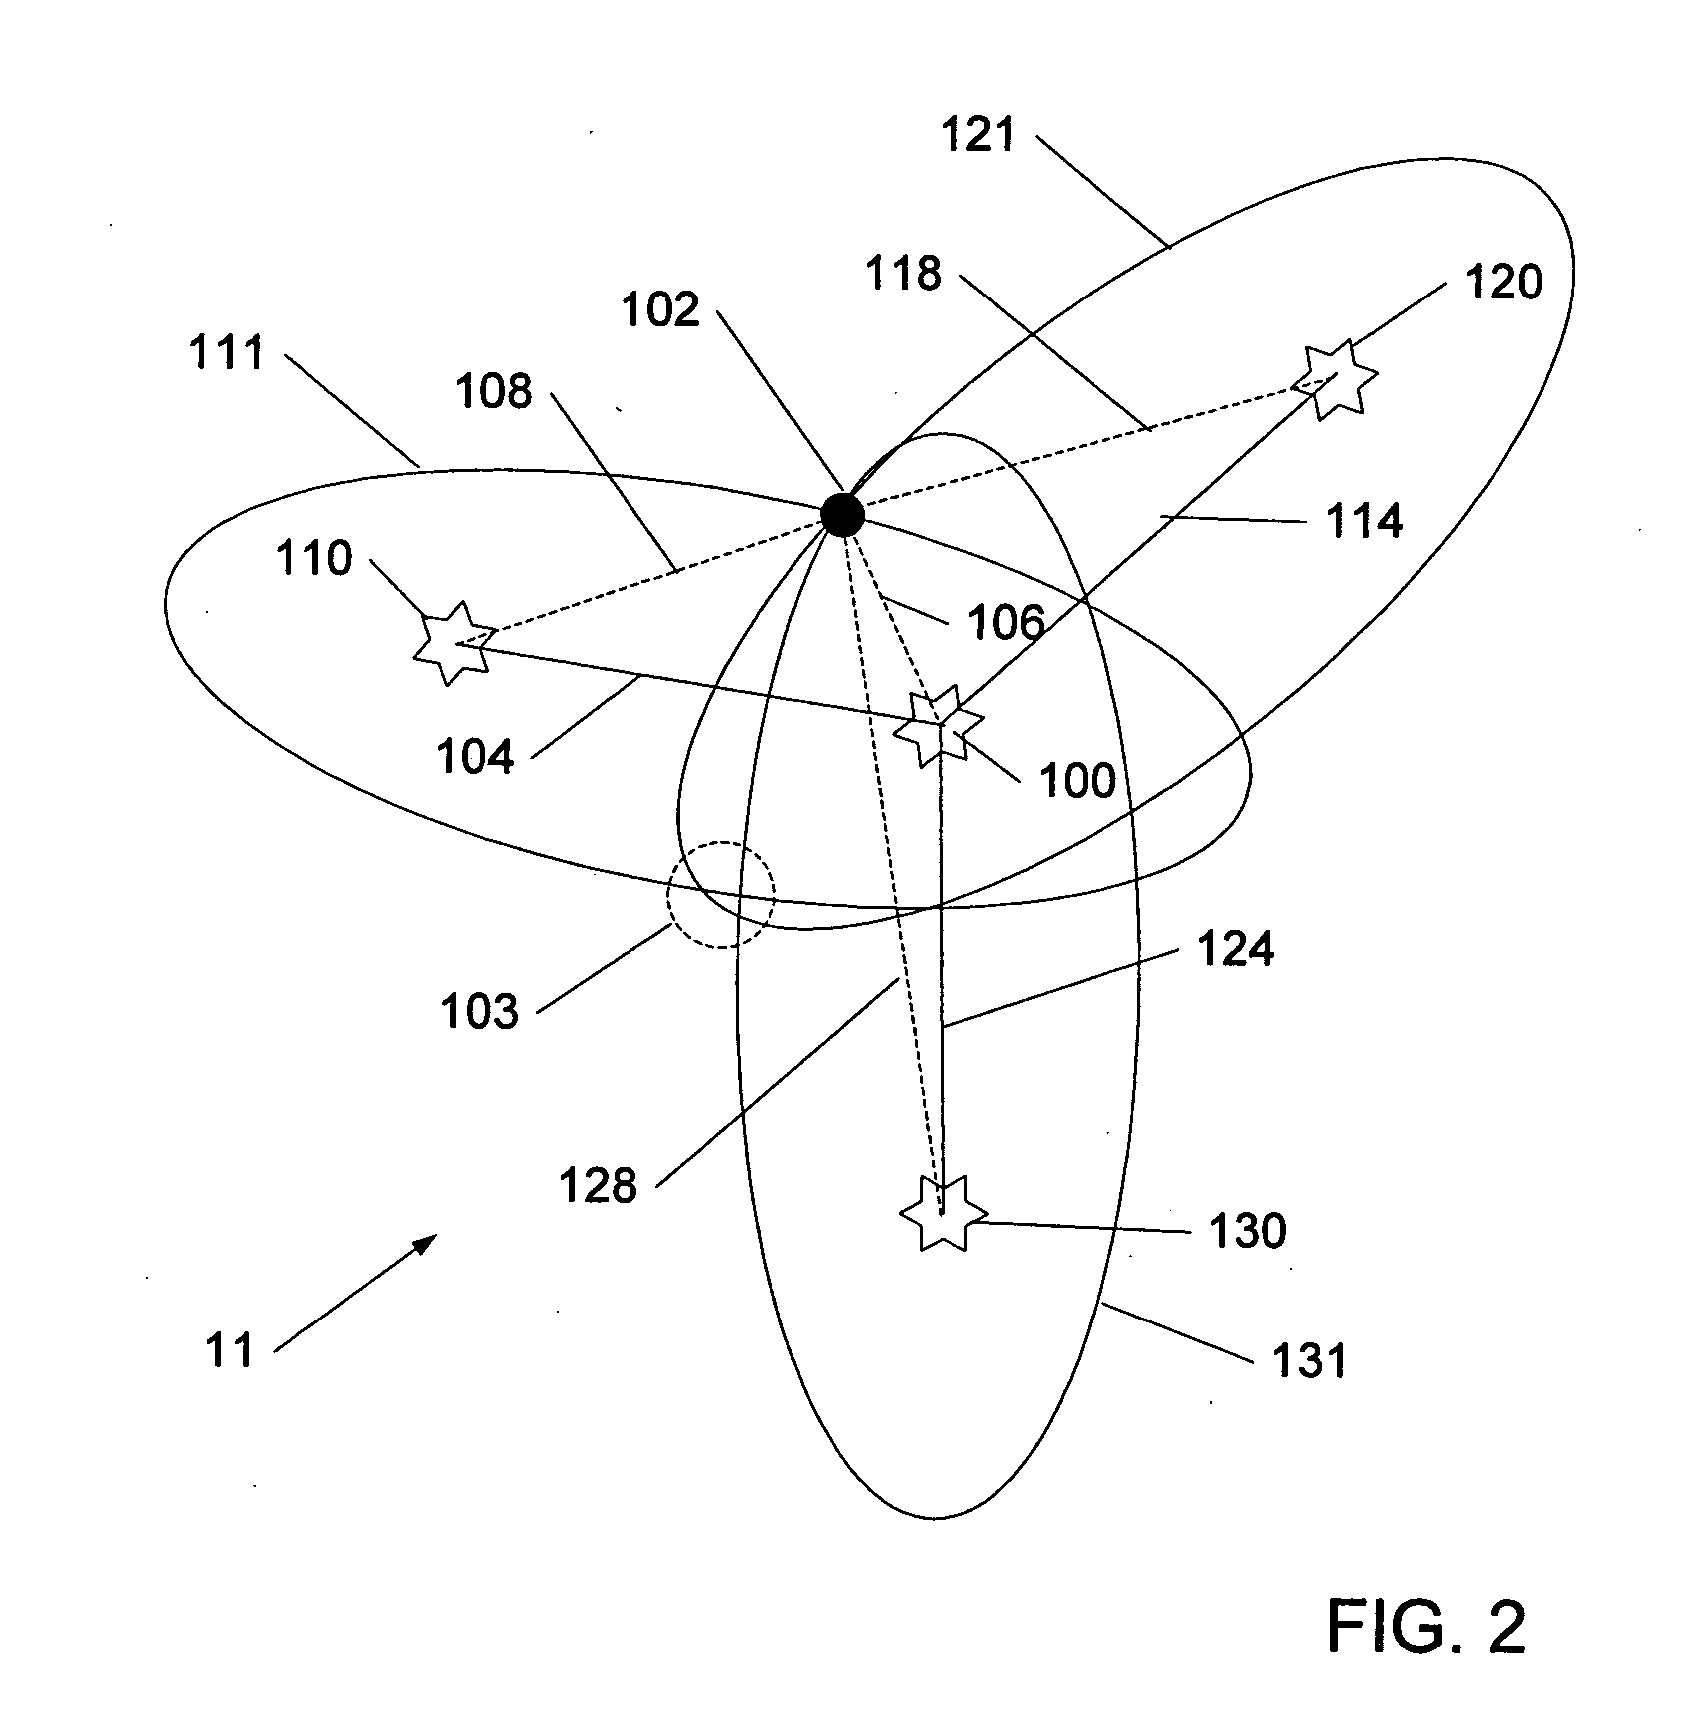 Real-time multistatic radar signal processing system and method